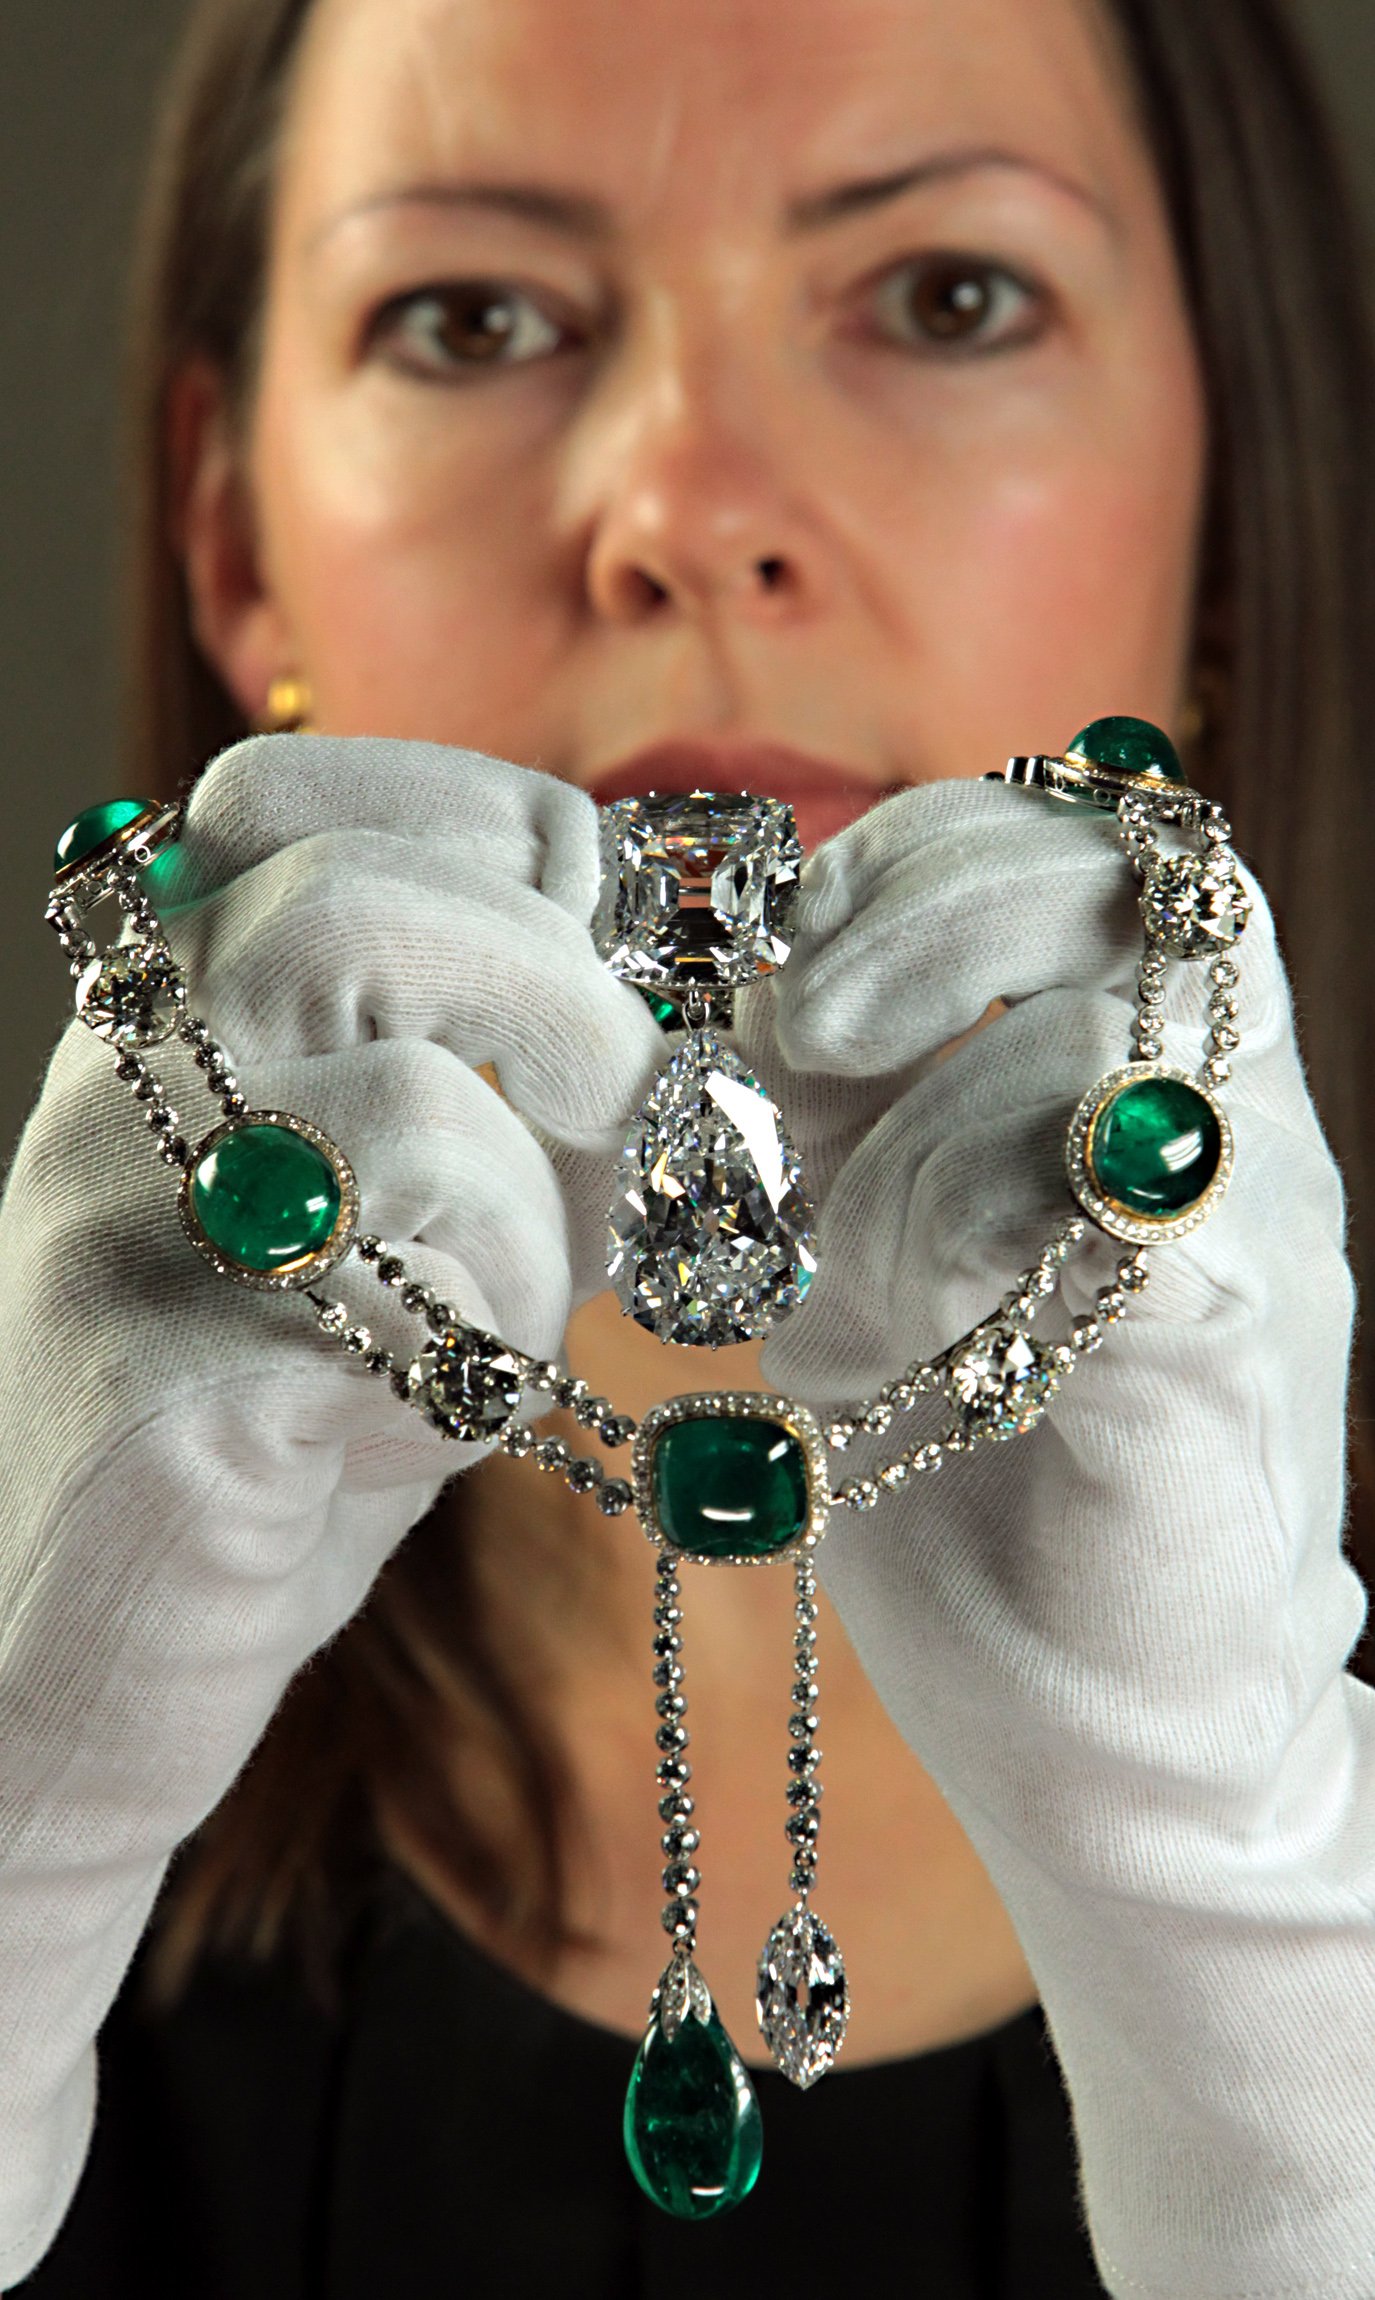 Exhibition curator Caroline de Guitaut holds the Cullinan Brooch and Cullinan V necklace pendant at the Queens Gallery in Buckingham Palace, central London, part of an exhibition of royal gems staged to mark the Queens 60-year reign. | Source: Getty Images